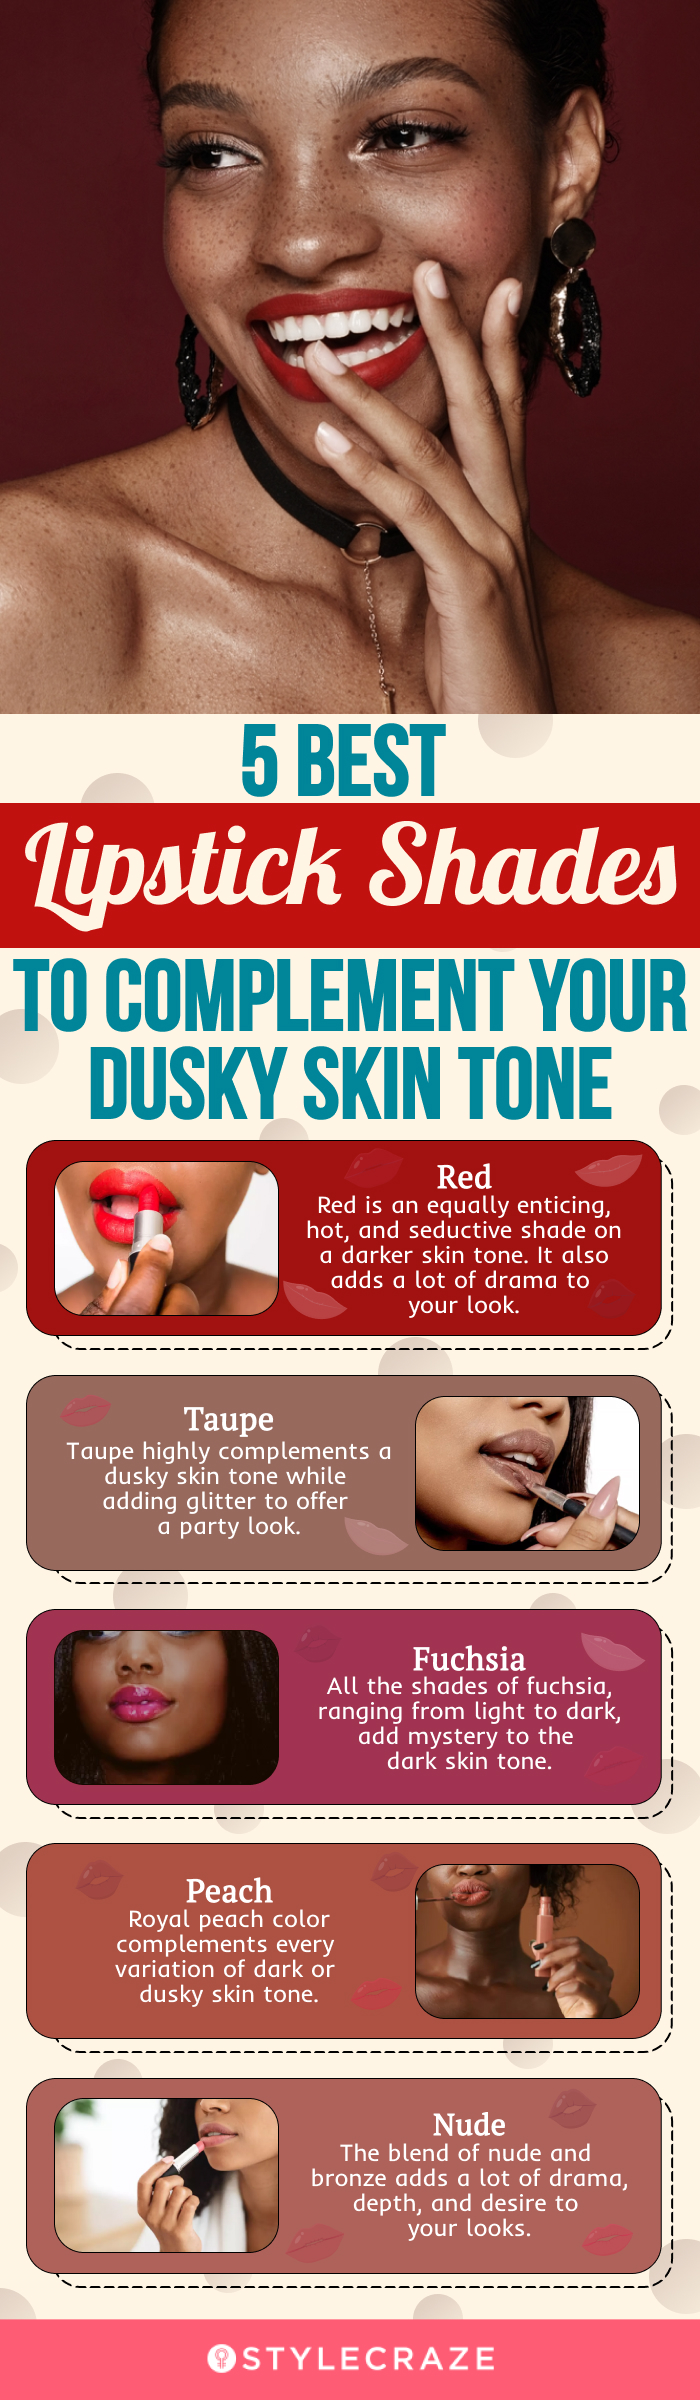 5 best lipstick shades to complement your dusky skin tone (infographic)